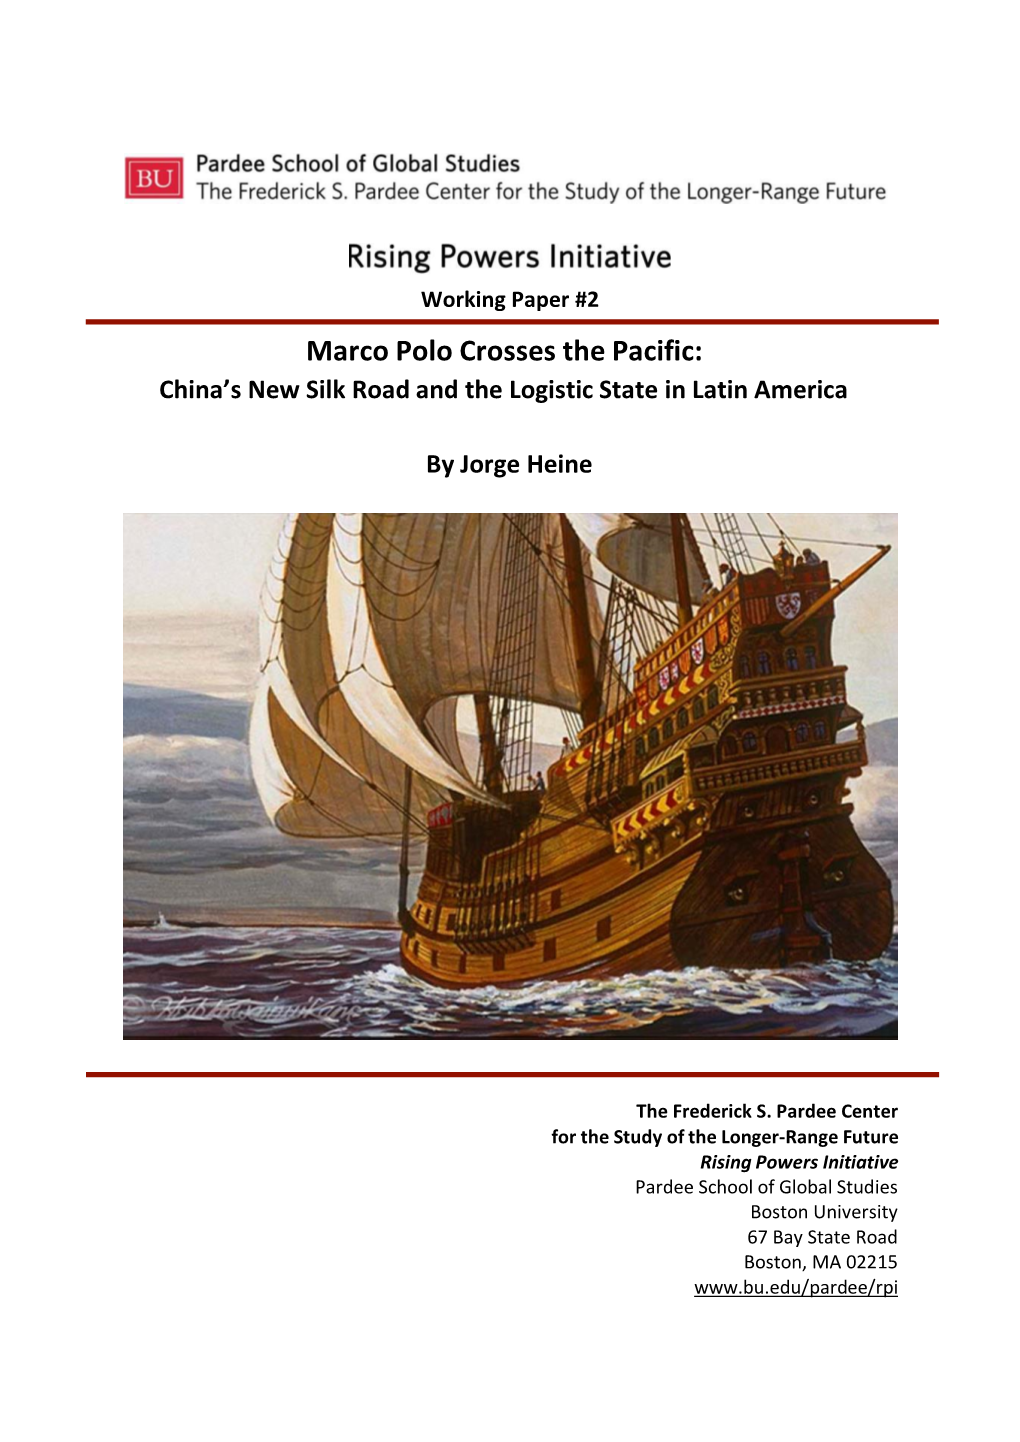 Marco Polo Crosses the Pacific: China’S New Silk Road and the Logistic State in Latin America